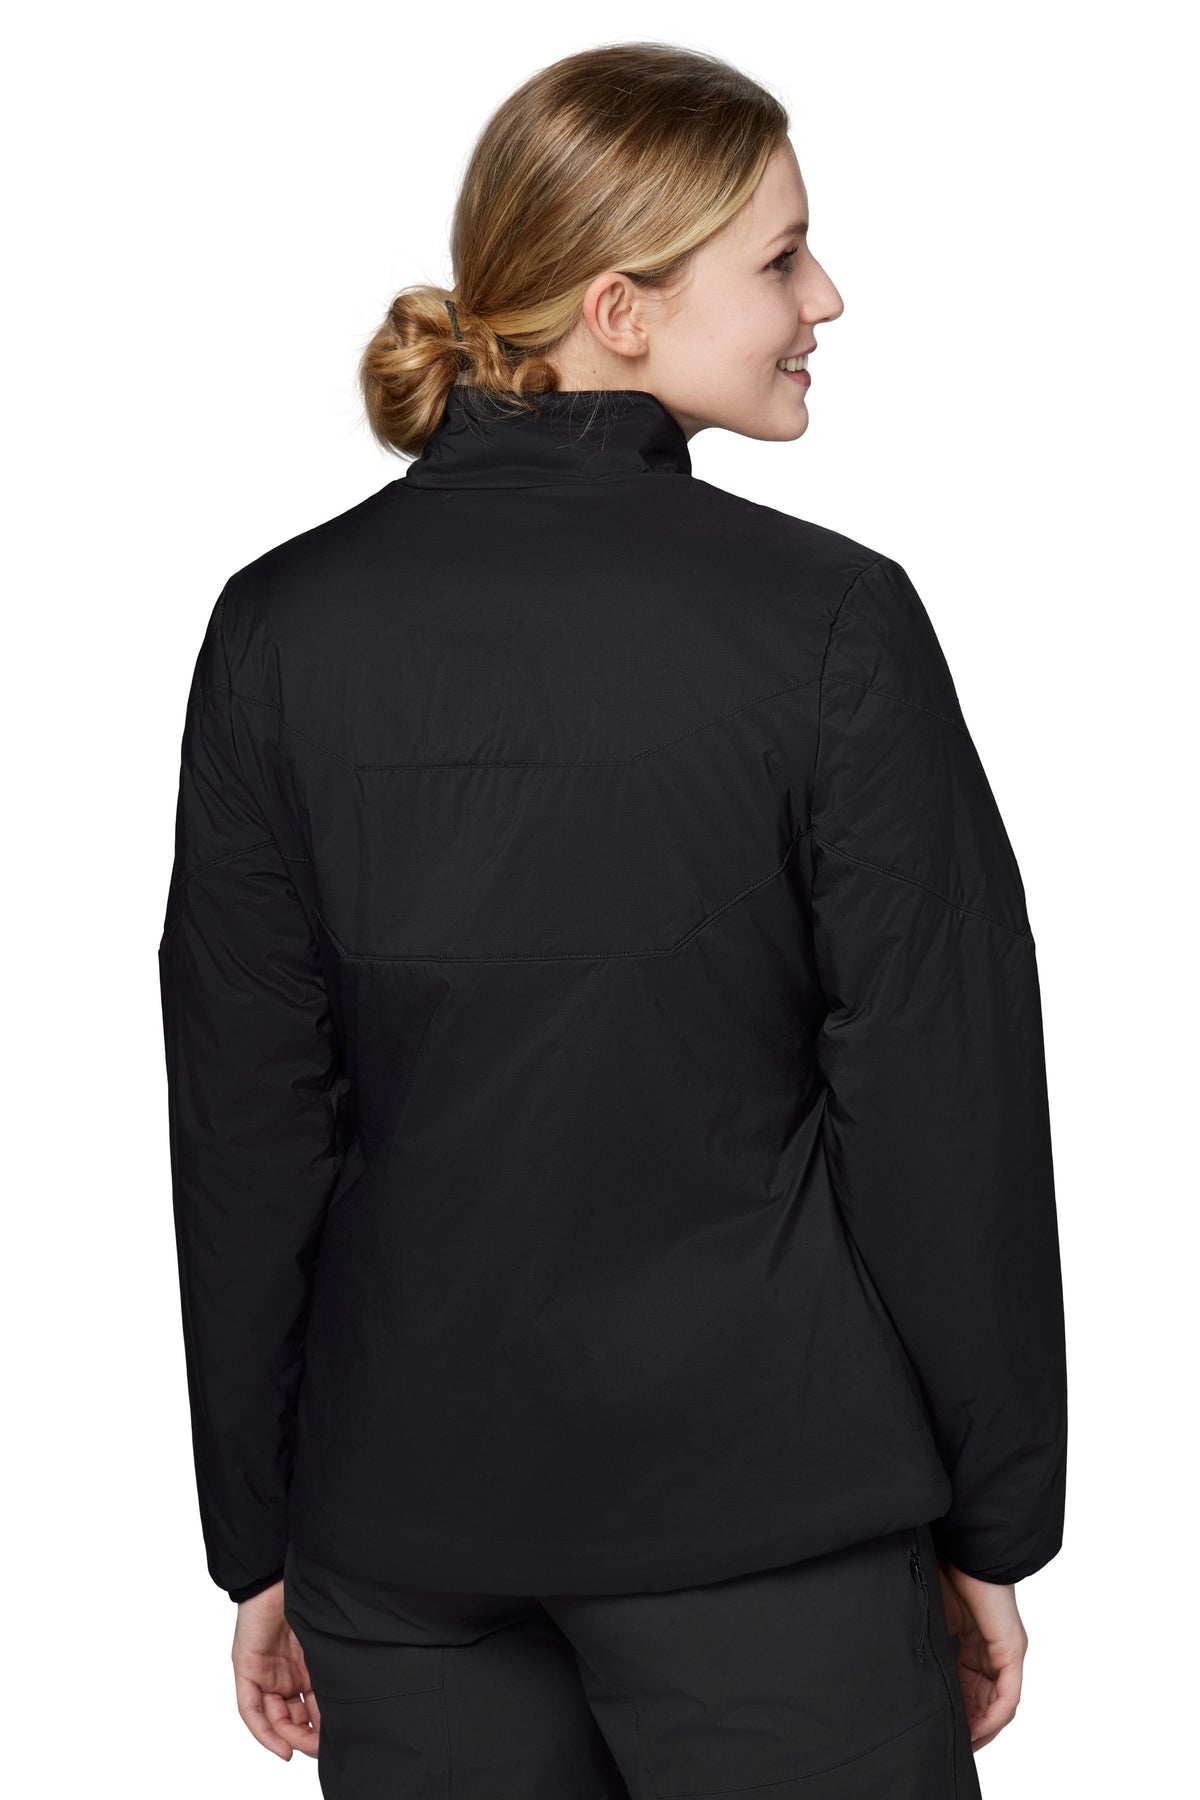 Lupine Jacket - Women's Packable Mid-Layer | Flylow – Flylow Gear